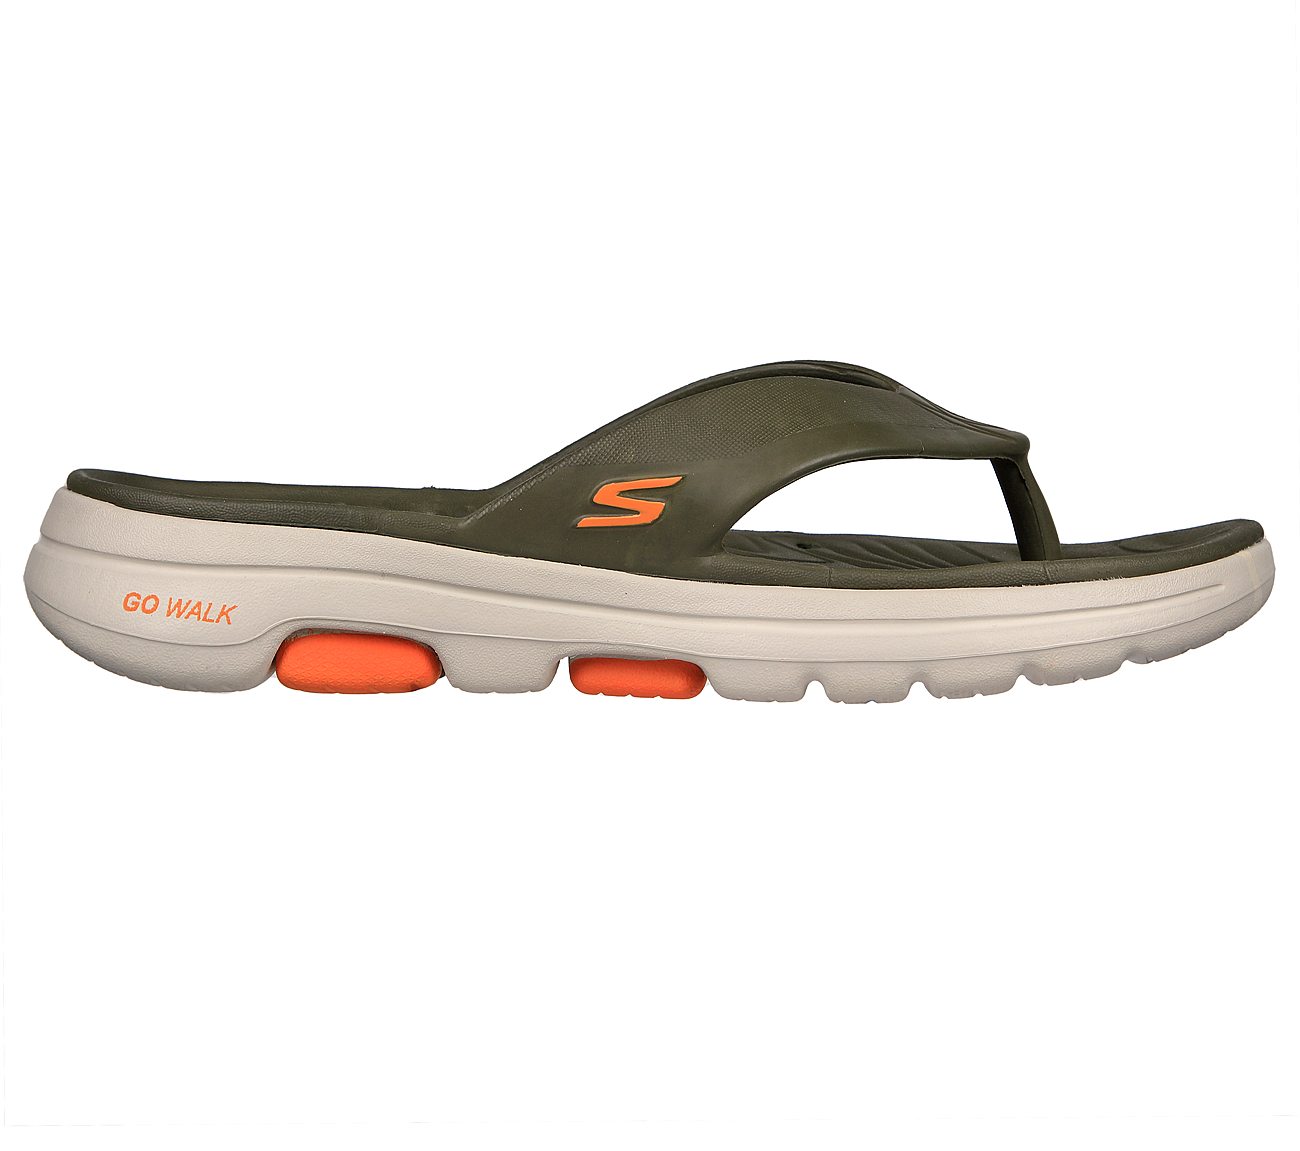 GO WALK 5 - SIT BACK, OOLIVE Footwear Lateral View